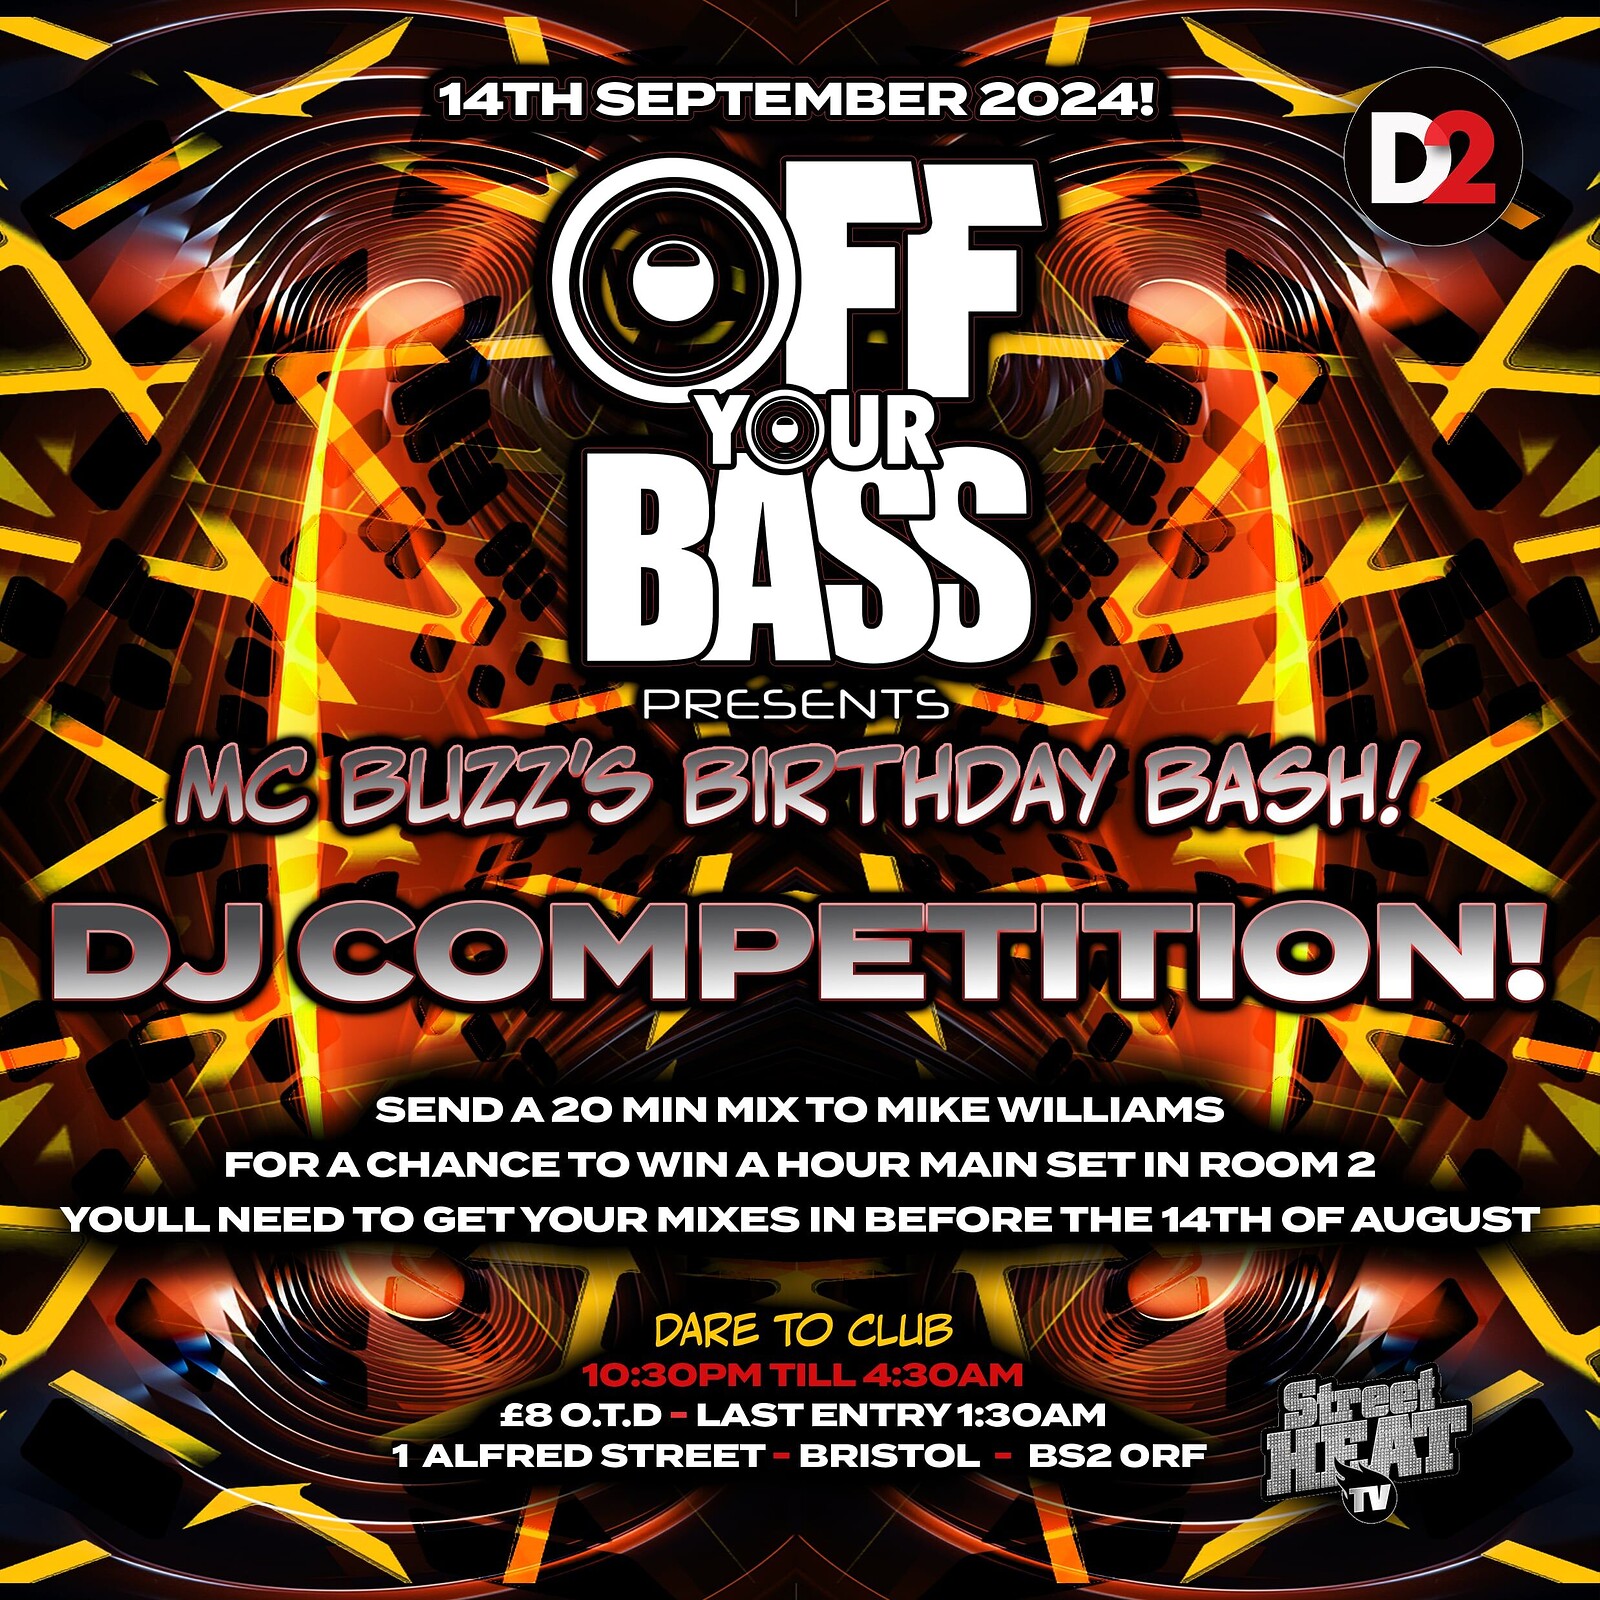 Off Your Bass presents Mc Buzz's birthday bash at Dare to Club